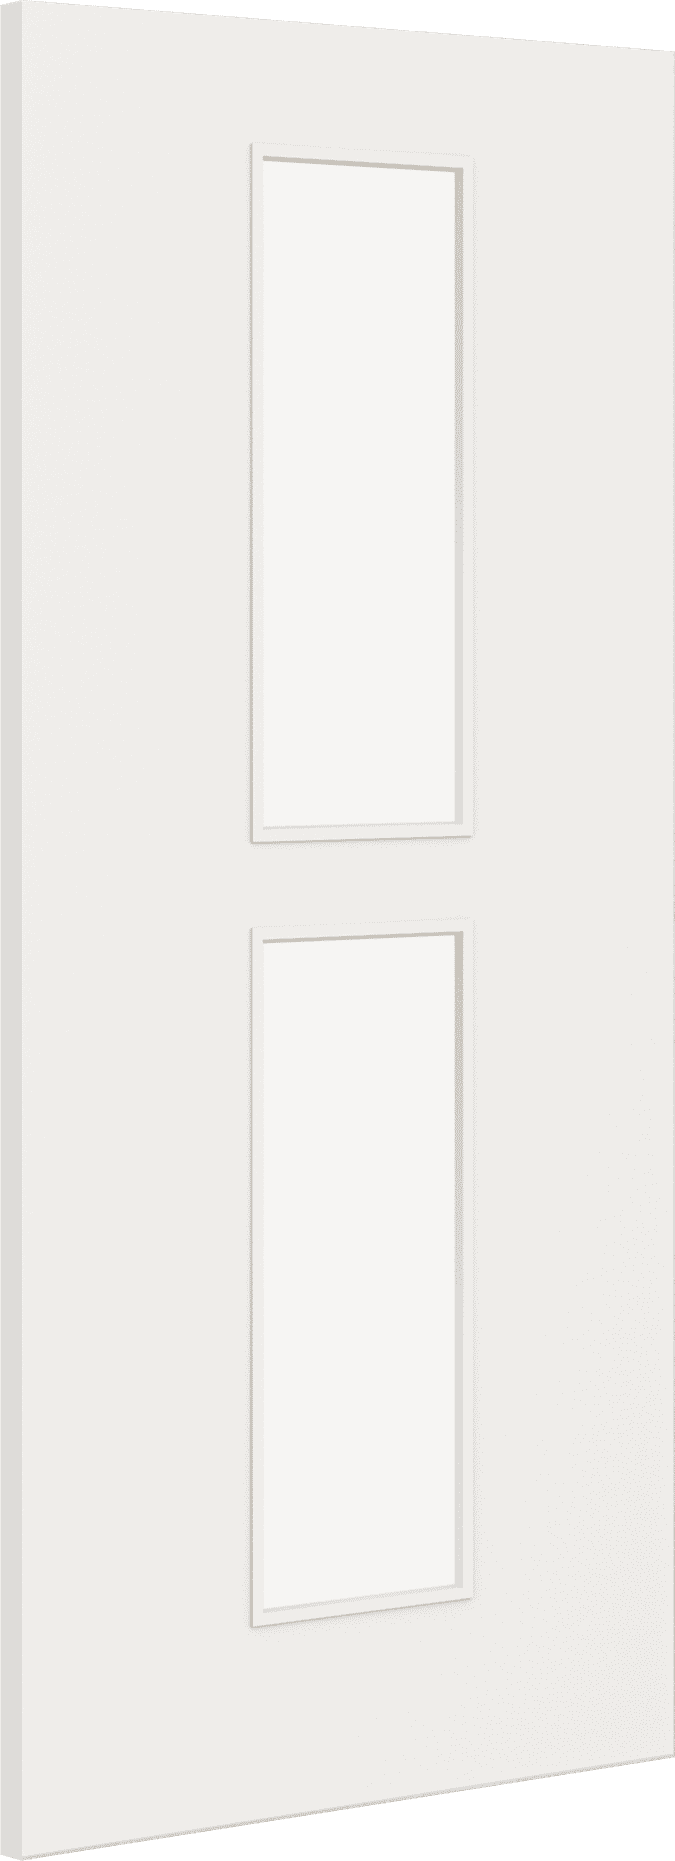 2040mm x 926mm x 44mm Architectural Paint Grade White 12 Frosted Glazed Fire Door Blank